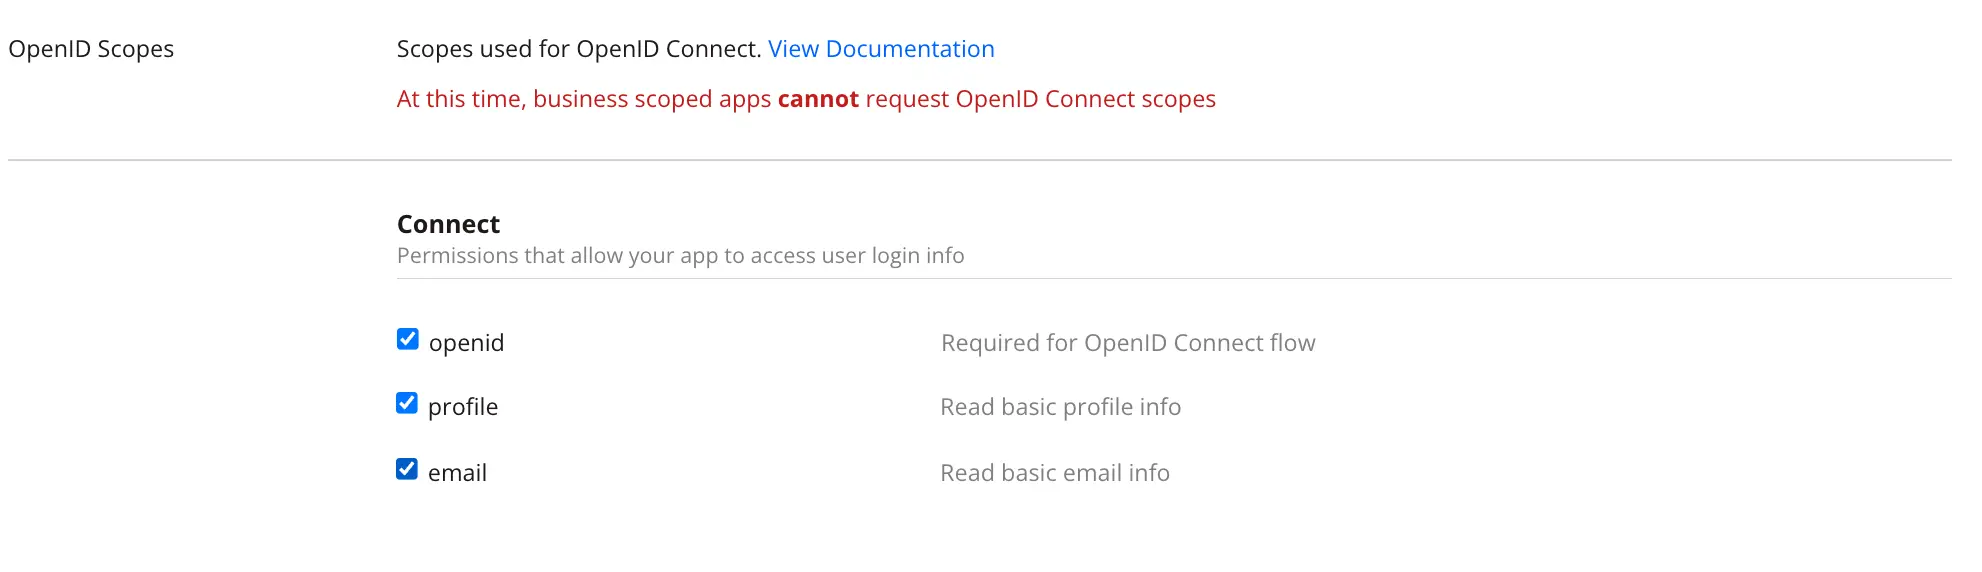 Screenshot of the available OpenID Connect scopes in the Permissions tab in the app settings for a Dropbox app